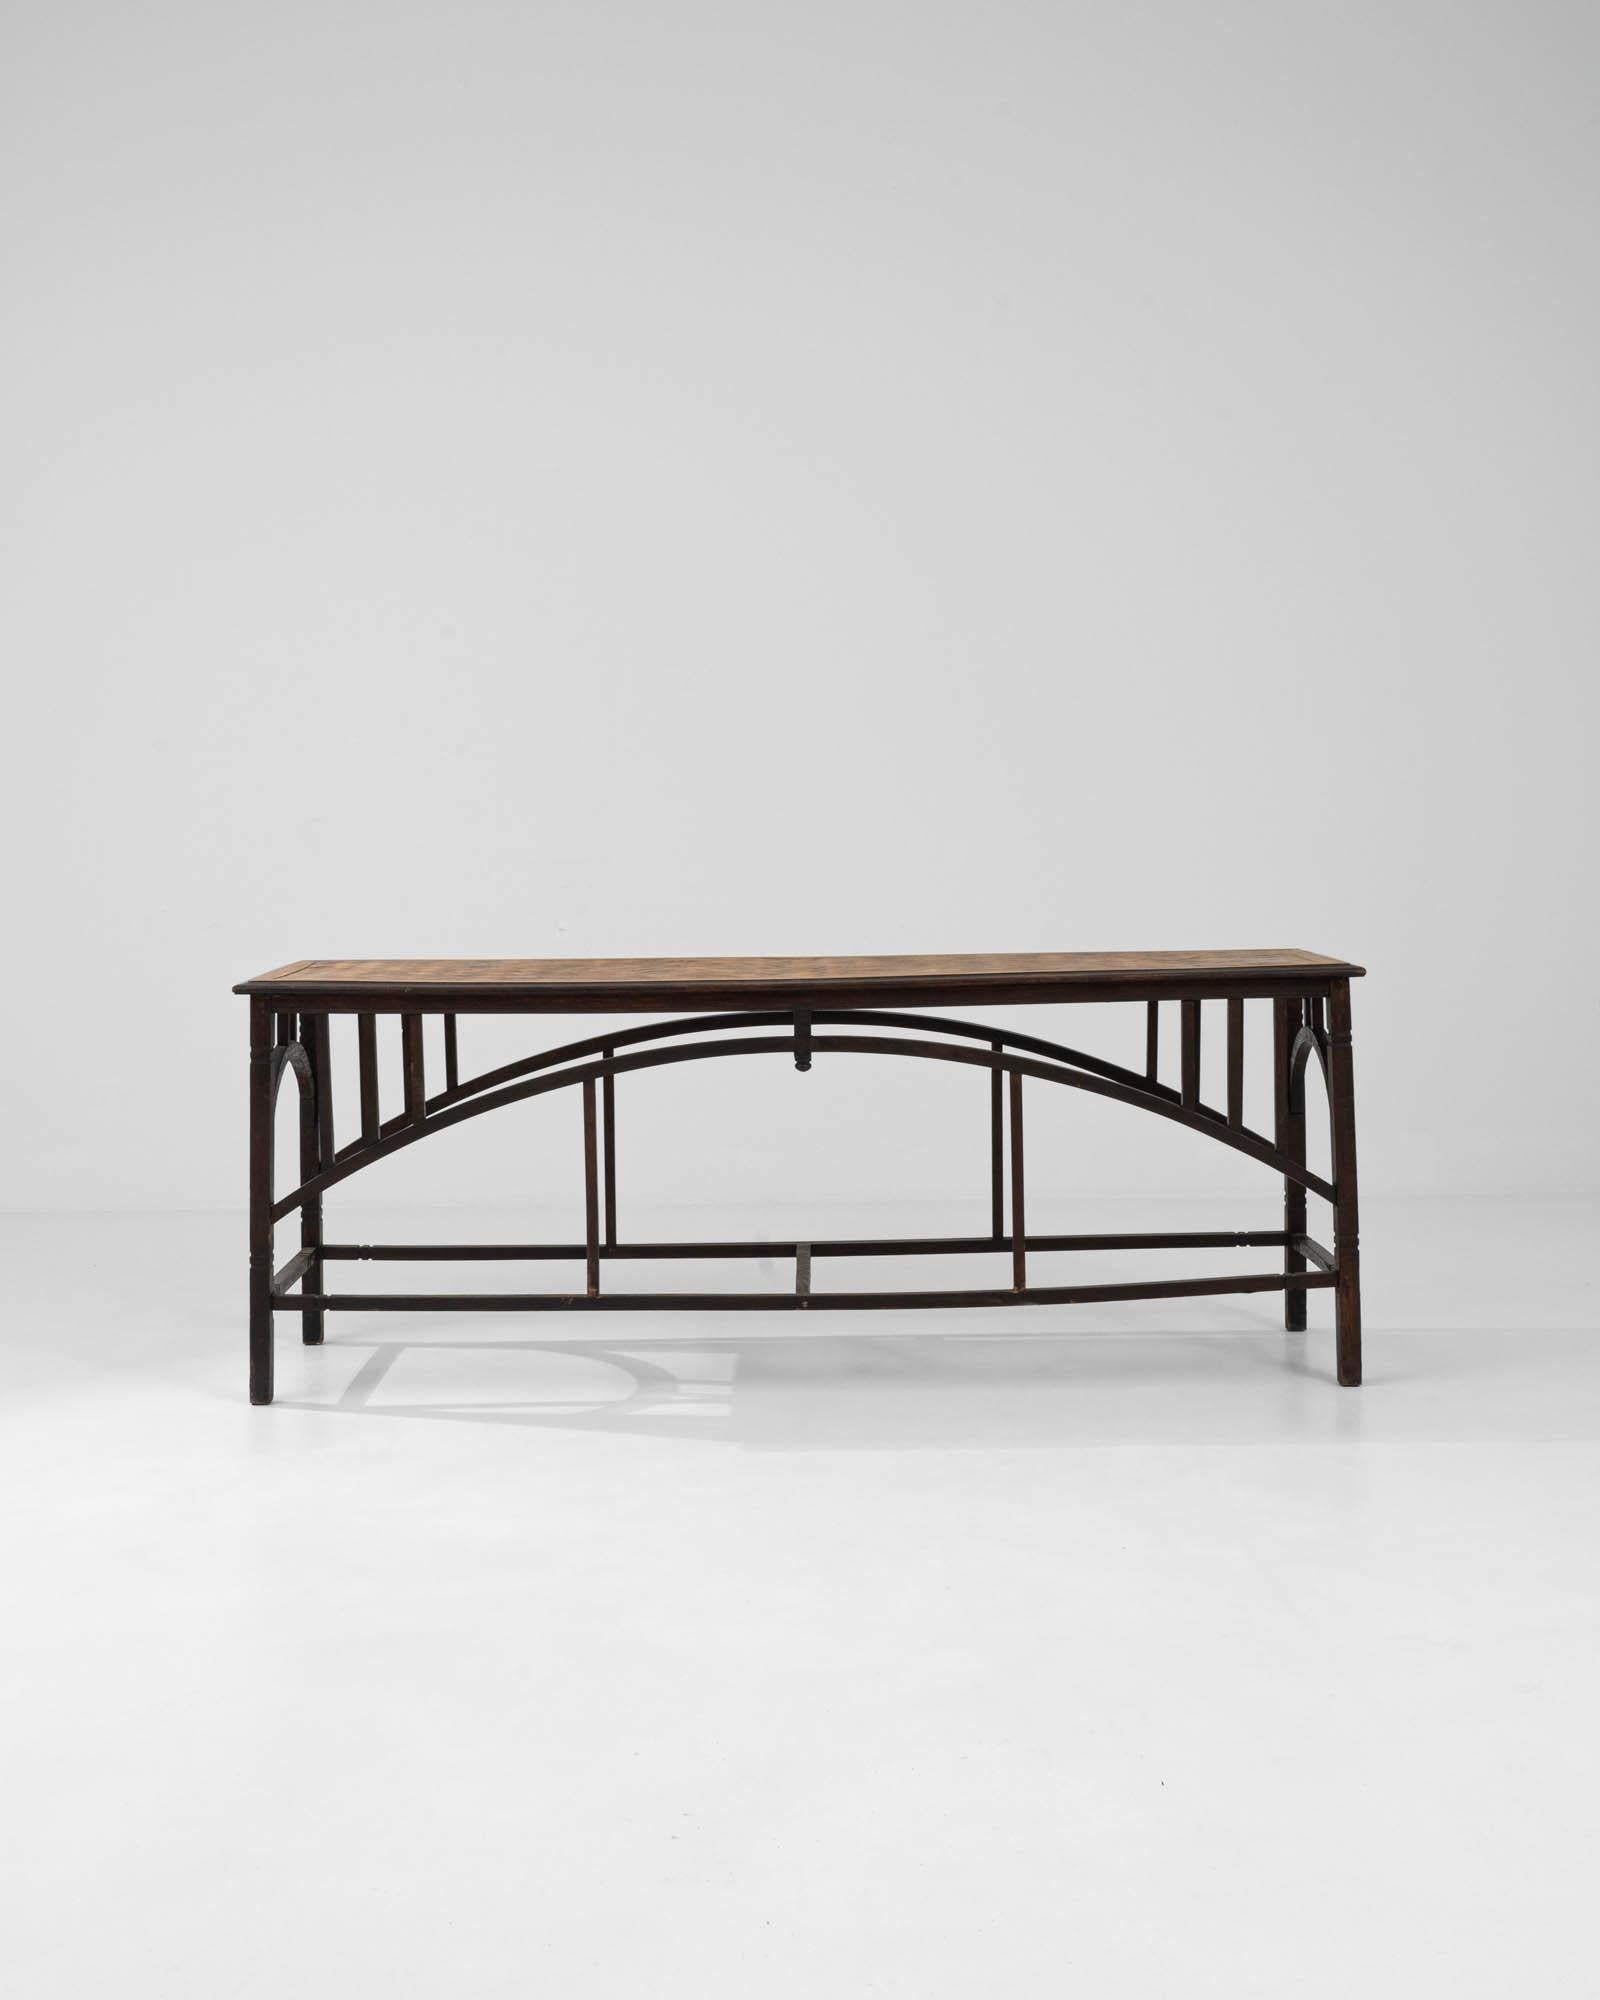 With a striking architectural silhouette and a beautifully crafted tabletop, this vintage wooden side table is a find to treasure. Made in France in the early 20th century, the multiple arches of the composition recall the Industrial elegance of the